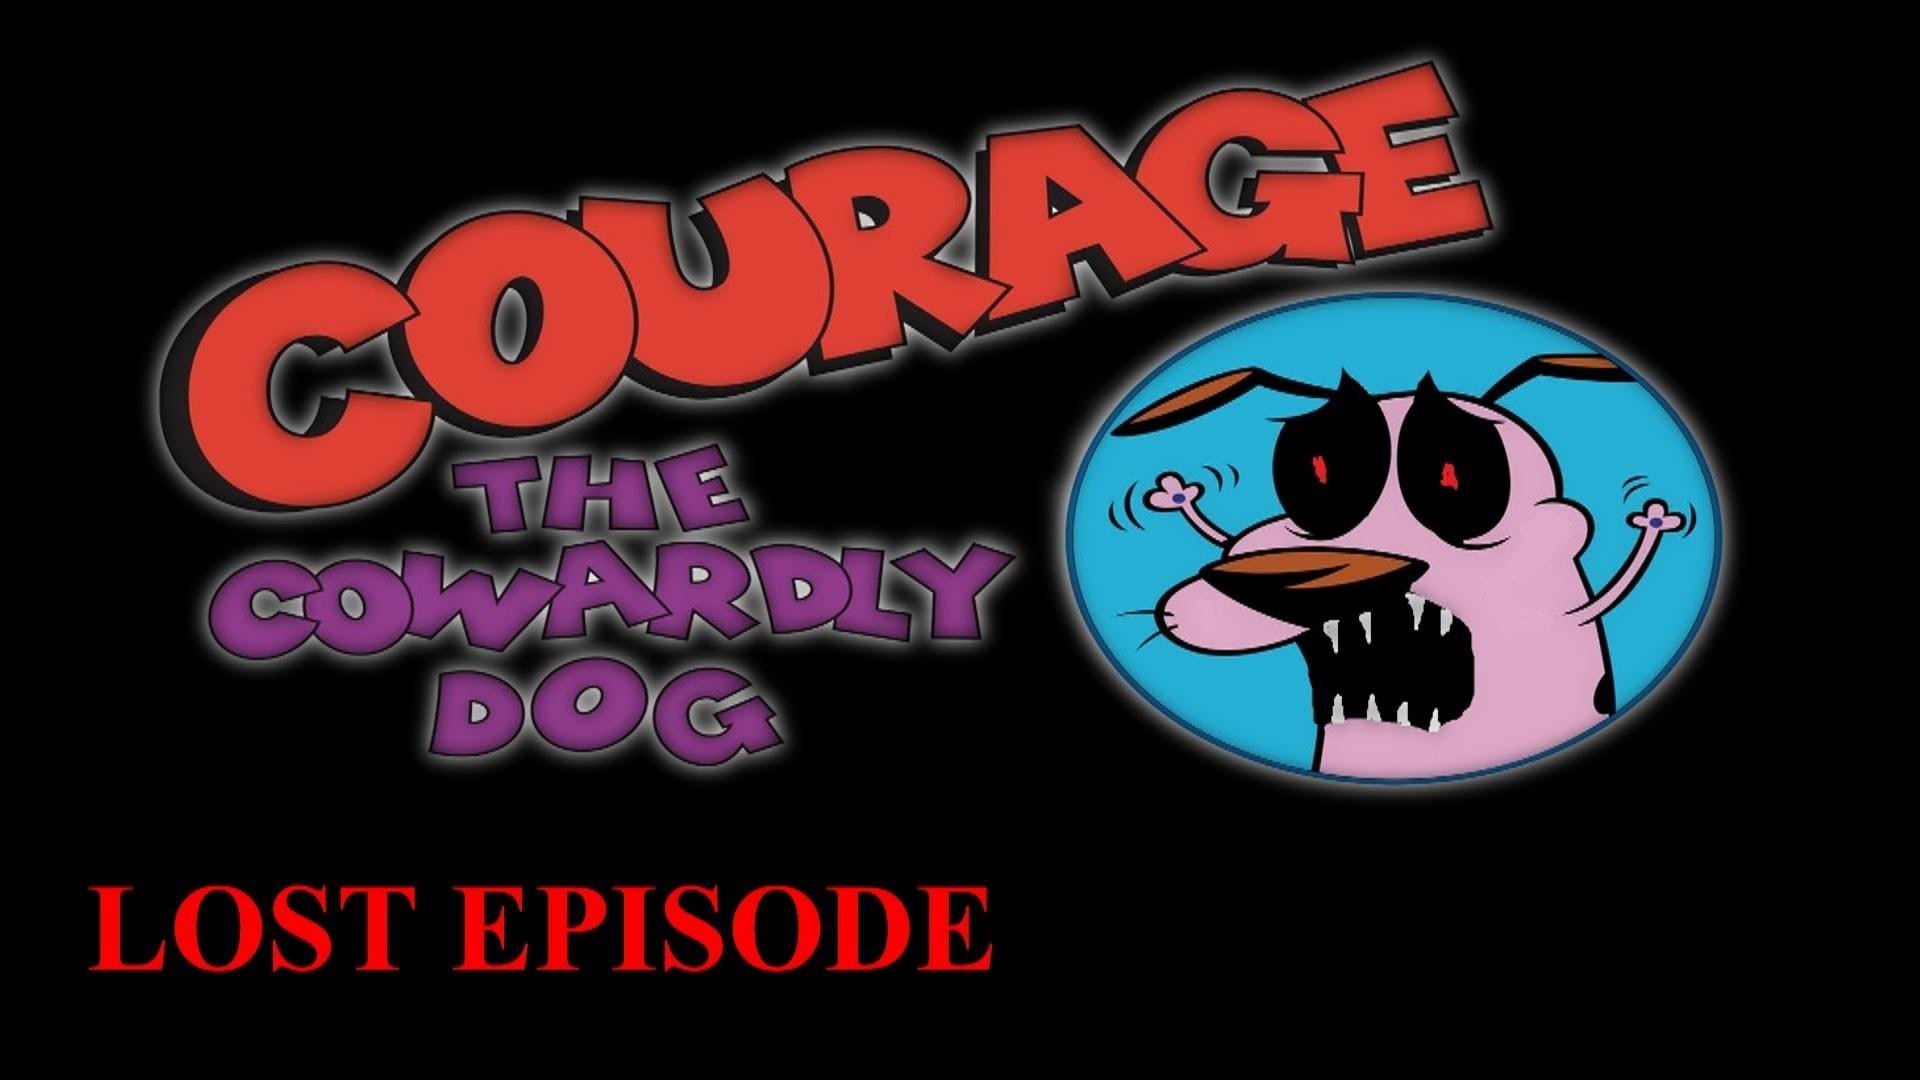 Wallpaper.wiki Image of Courage The Cowardly Dog